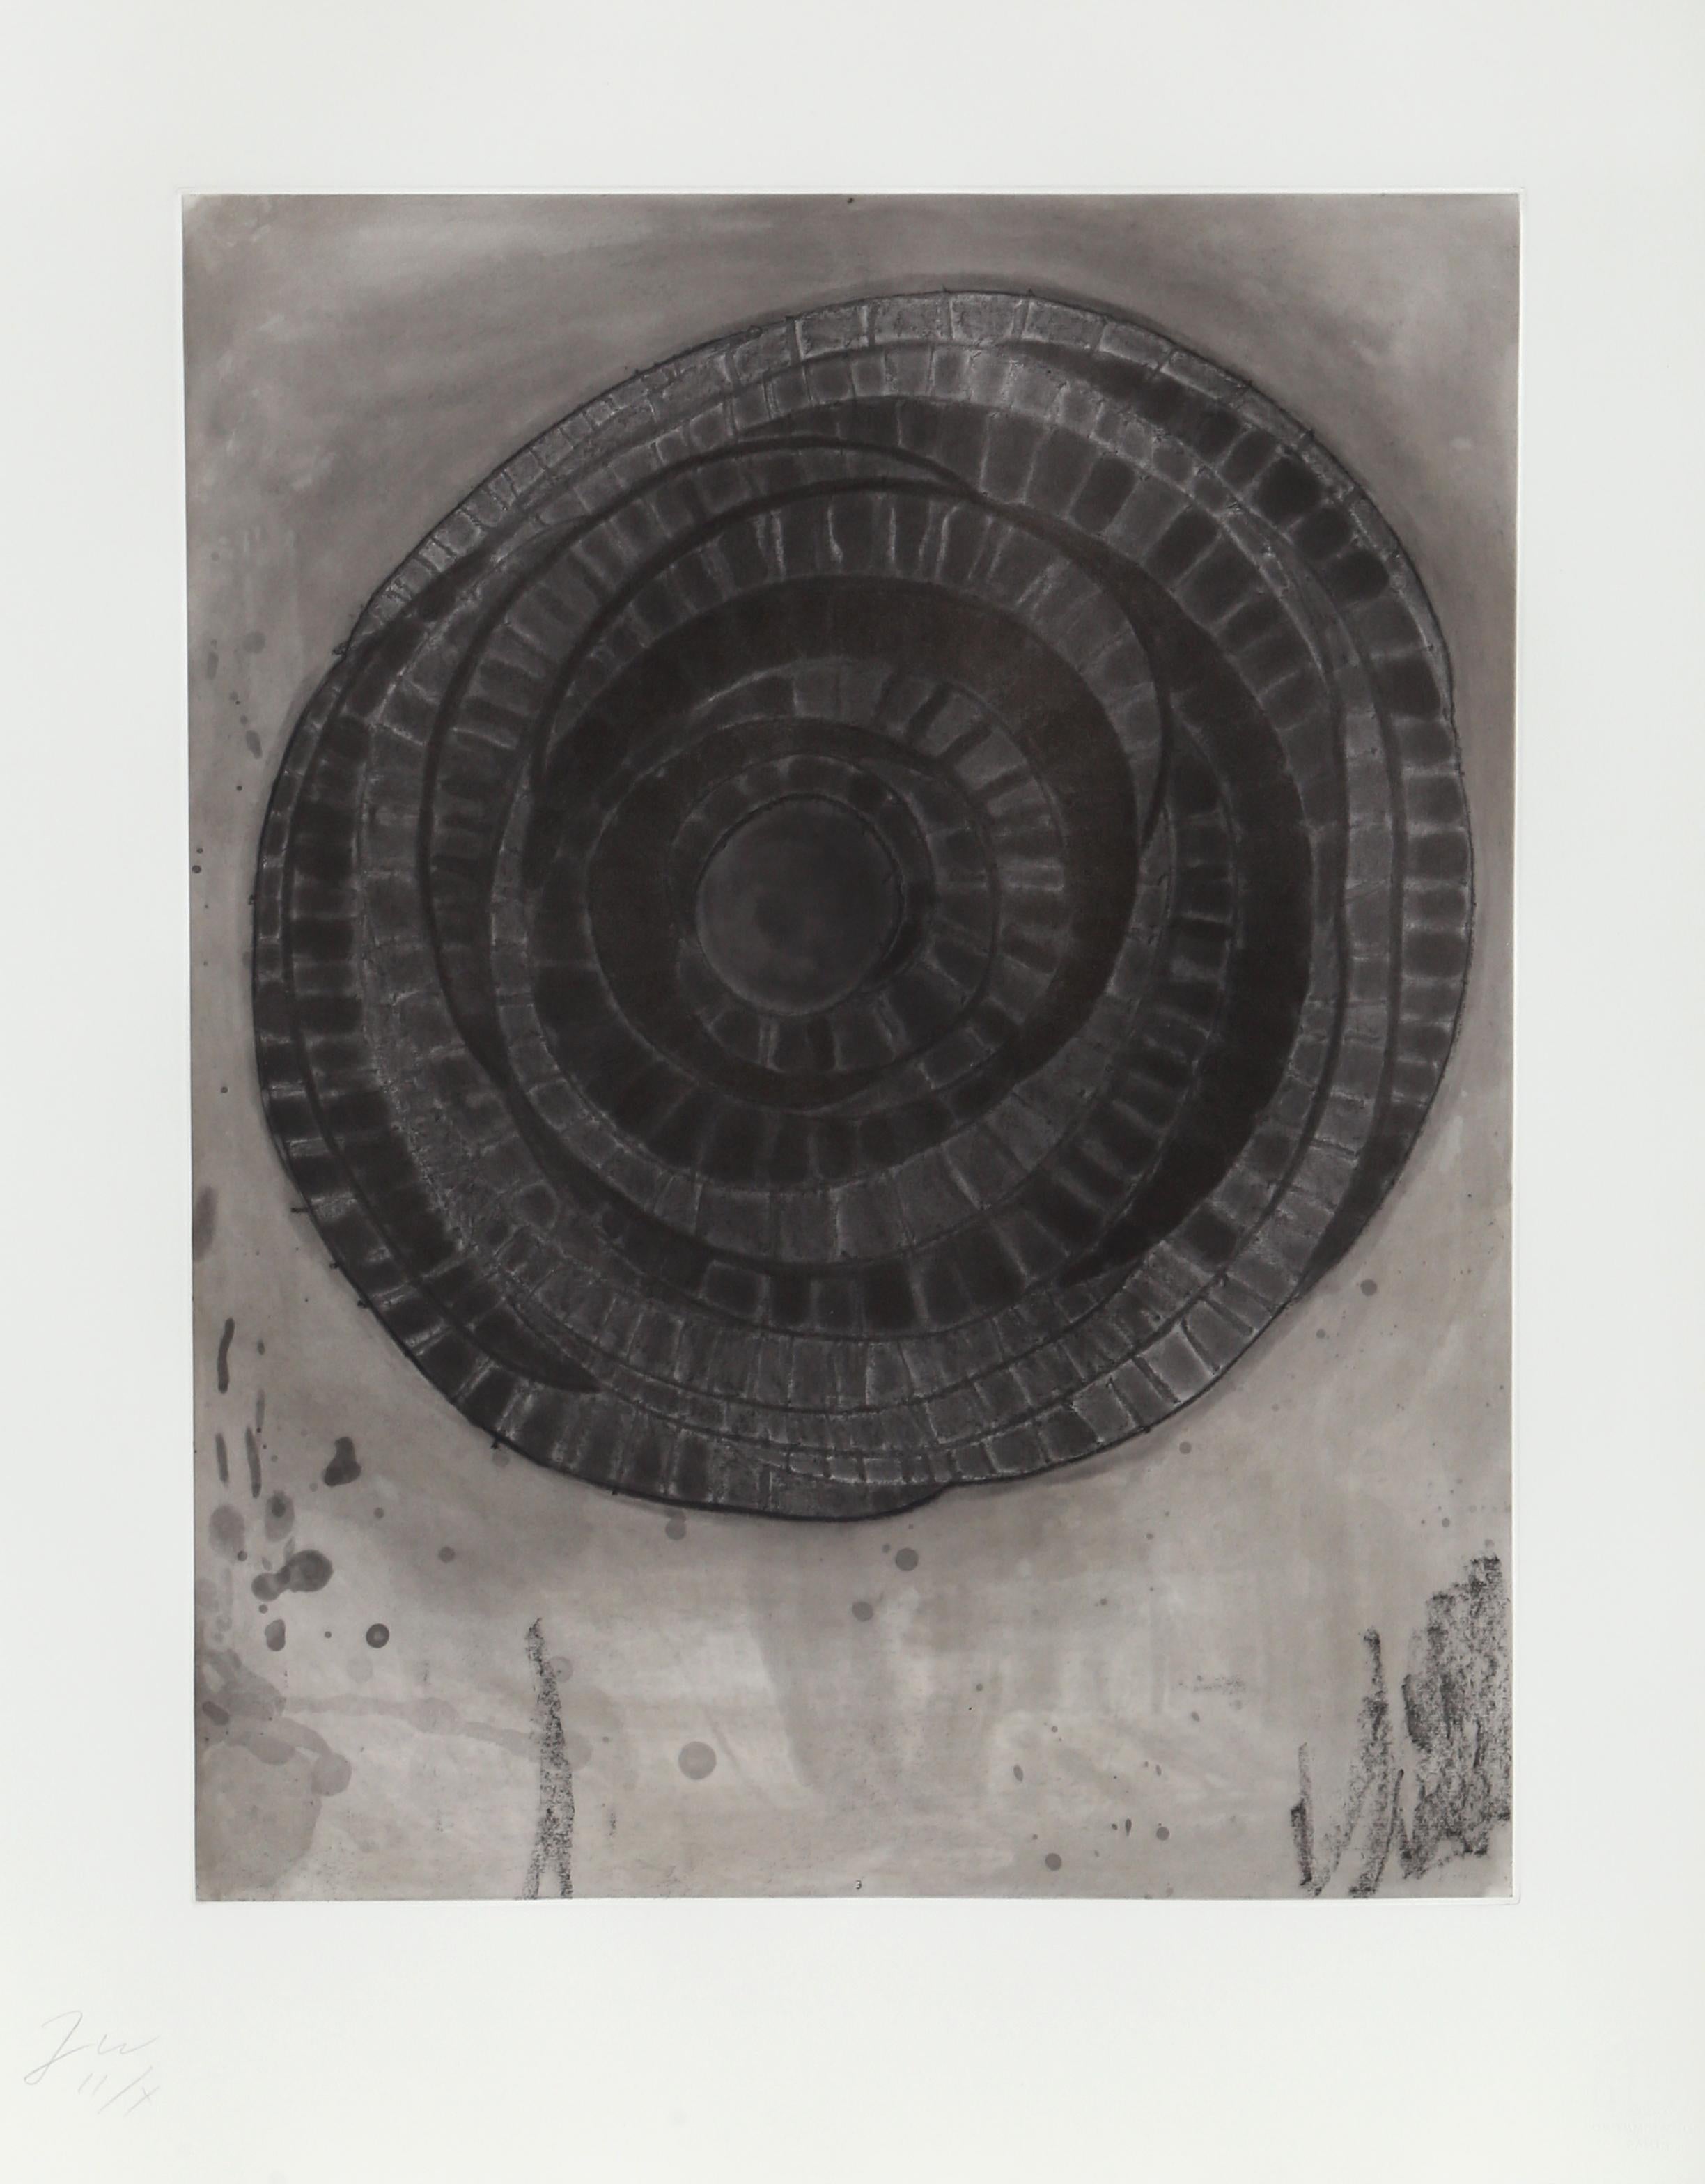 untitled 1 from Album, Etching by Terry Winters